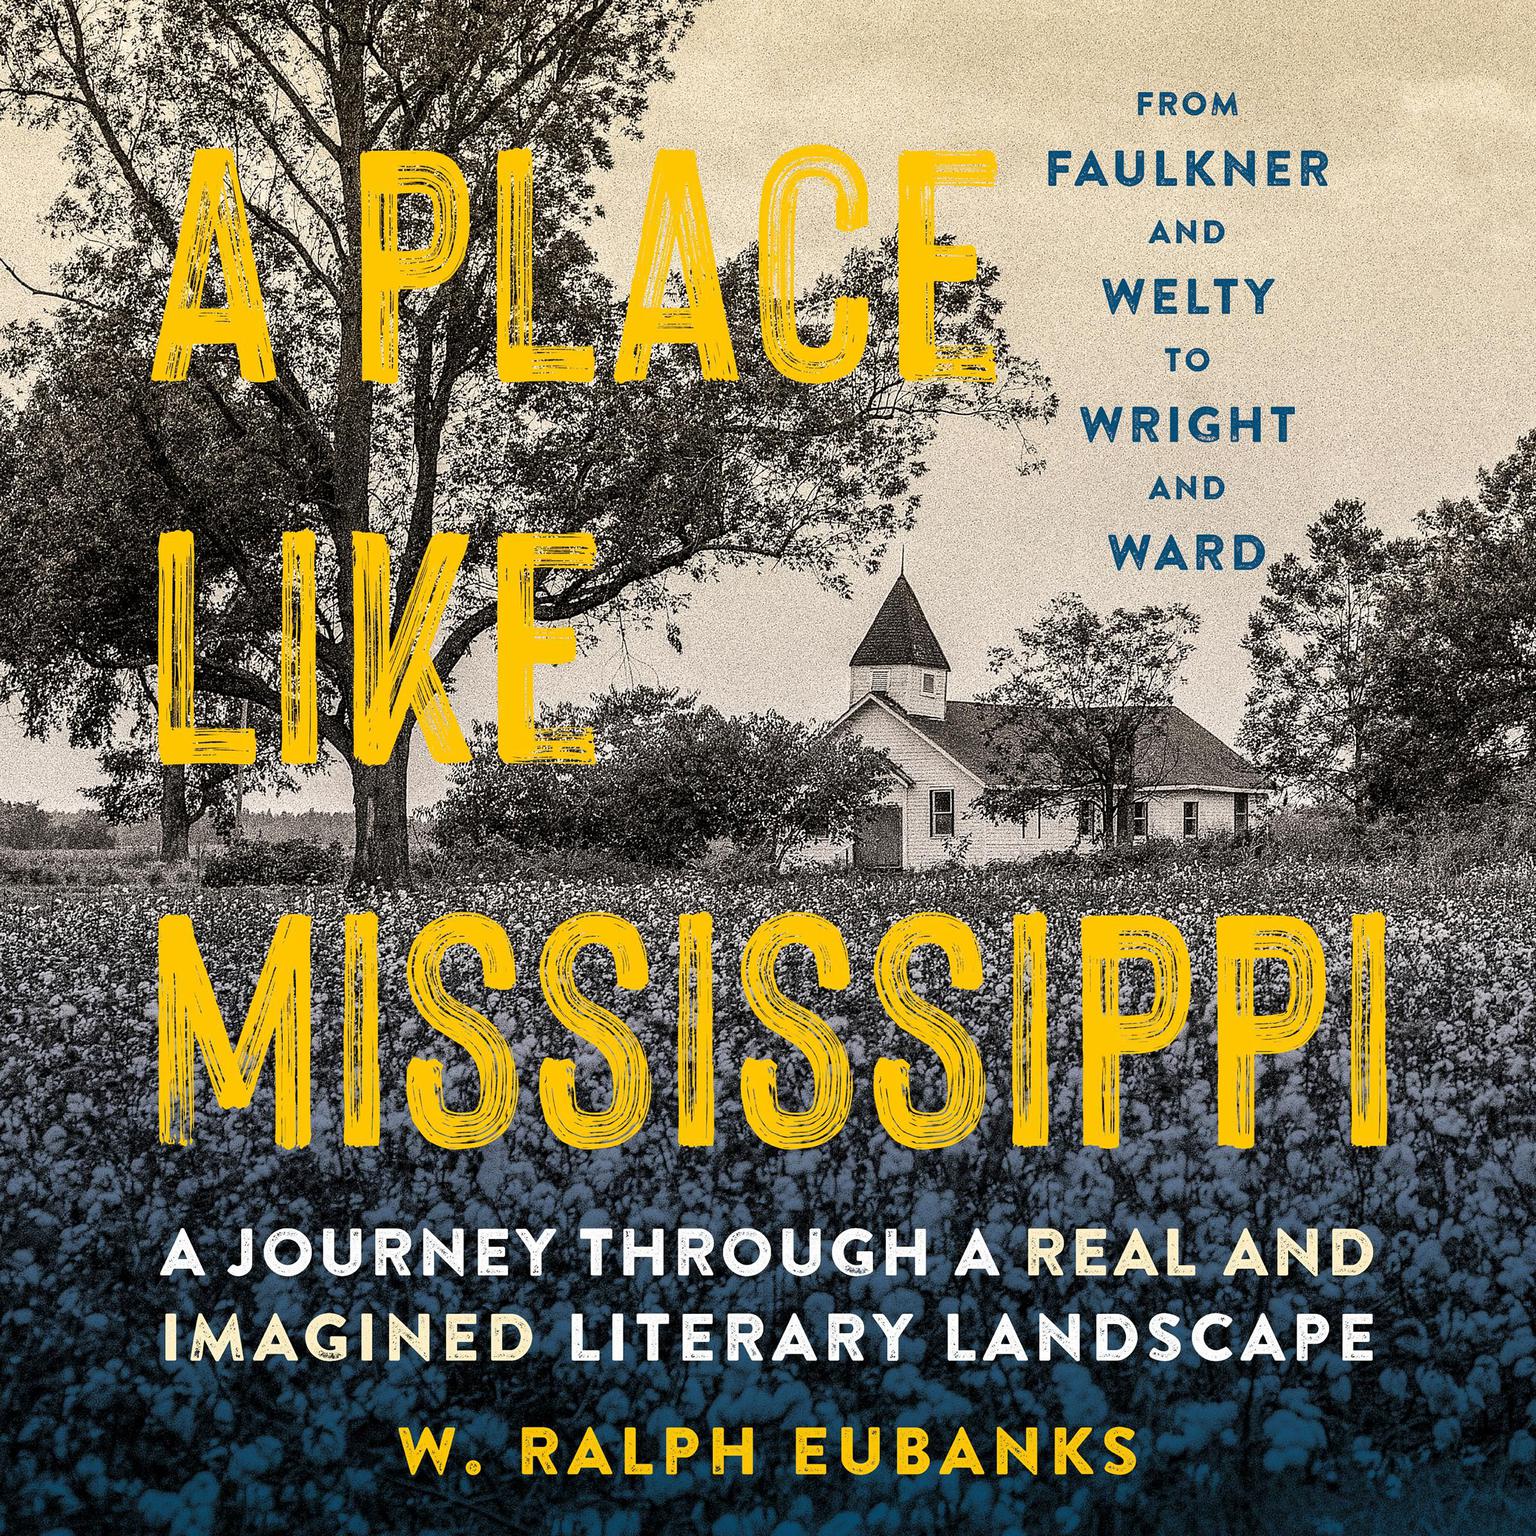 A Place Like Mississippi: A Journey Through a Real and Imagined Literary Landscape Audiobook, by W. Ralph Eubanks